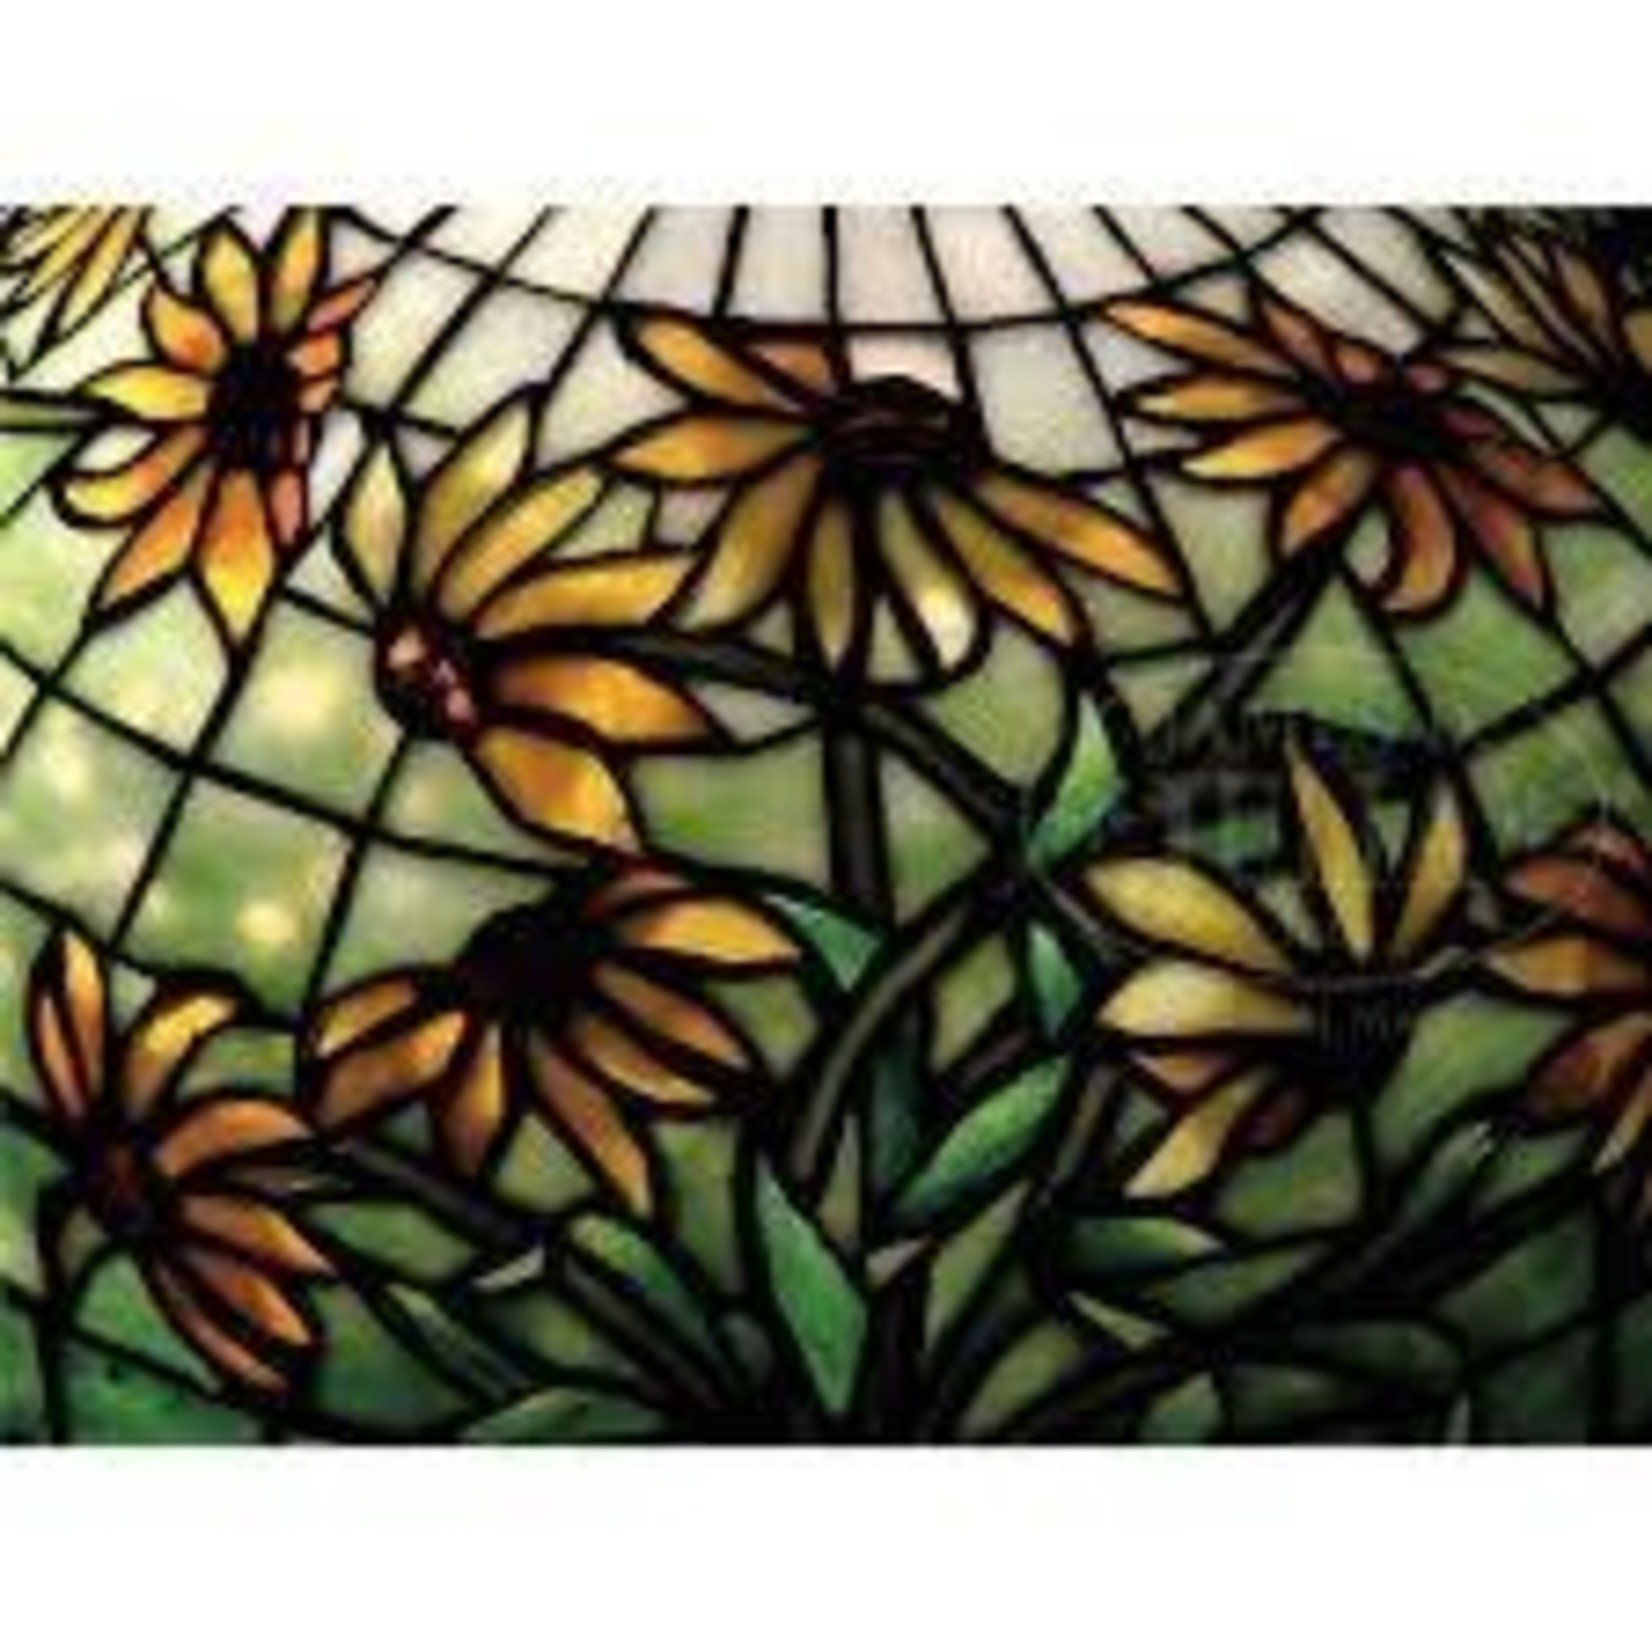 Museum Store Products Tiffany Hand Mirror Black-Eyed Susan